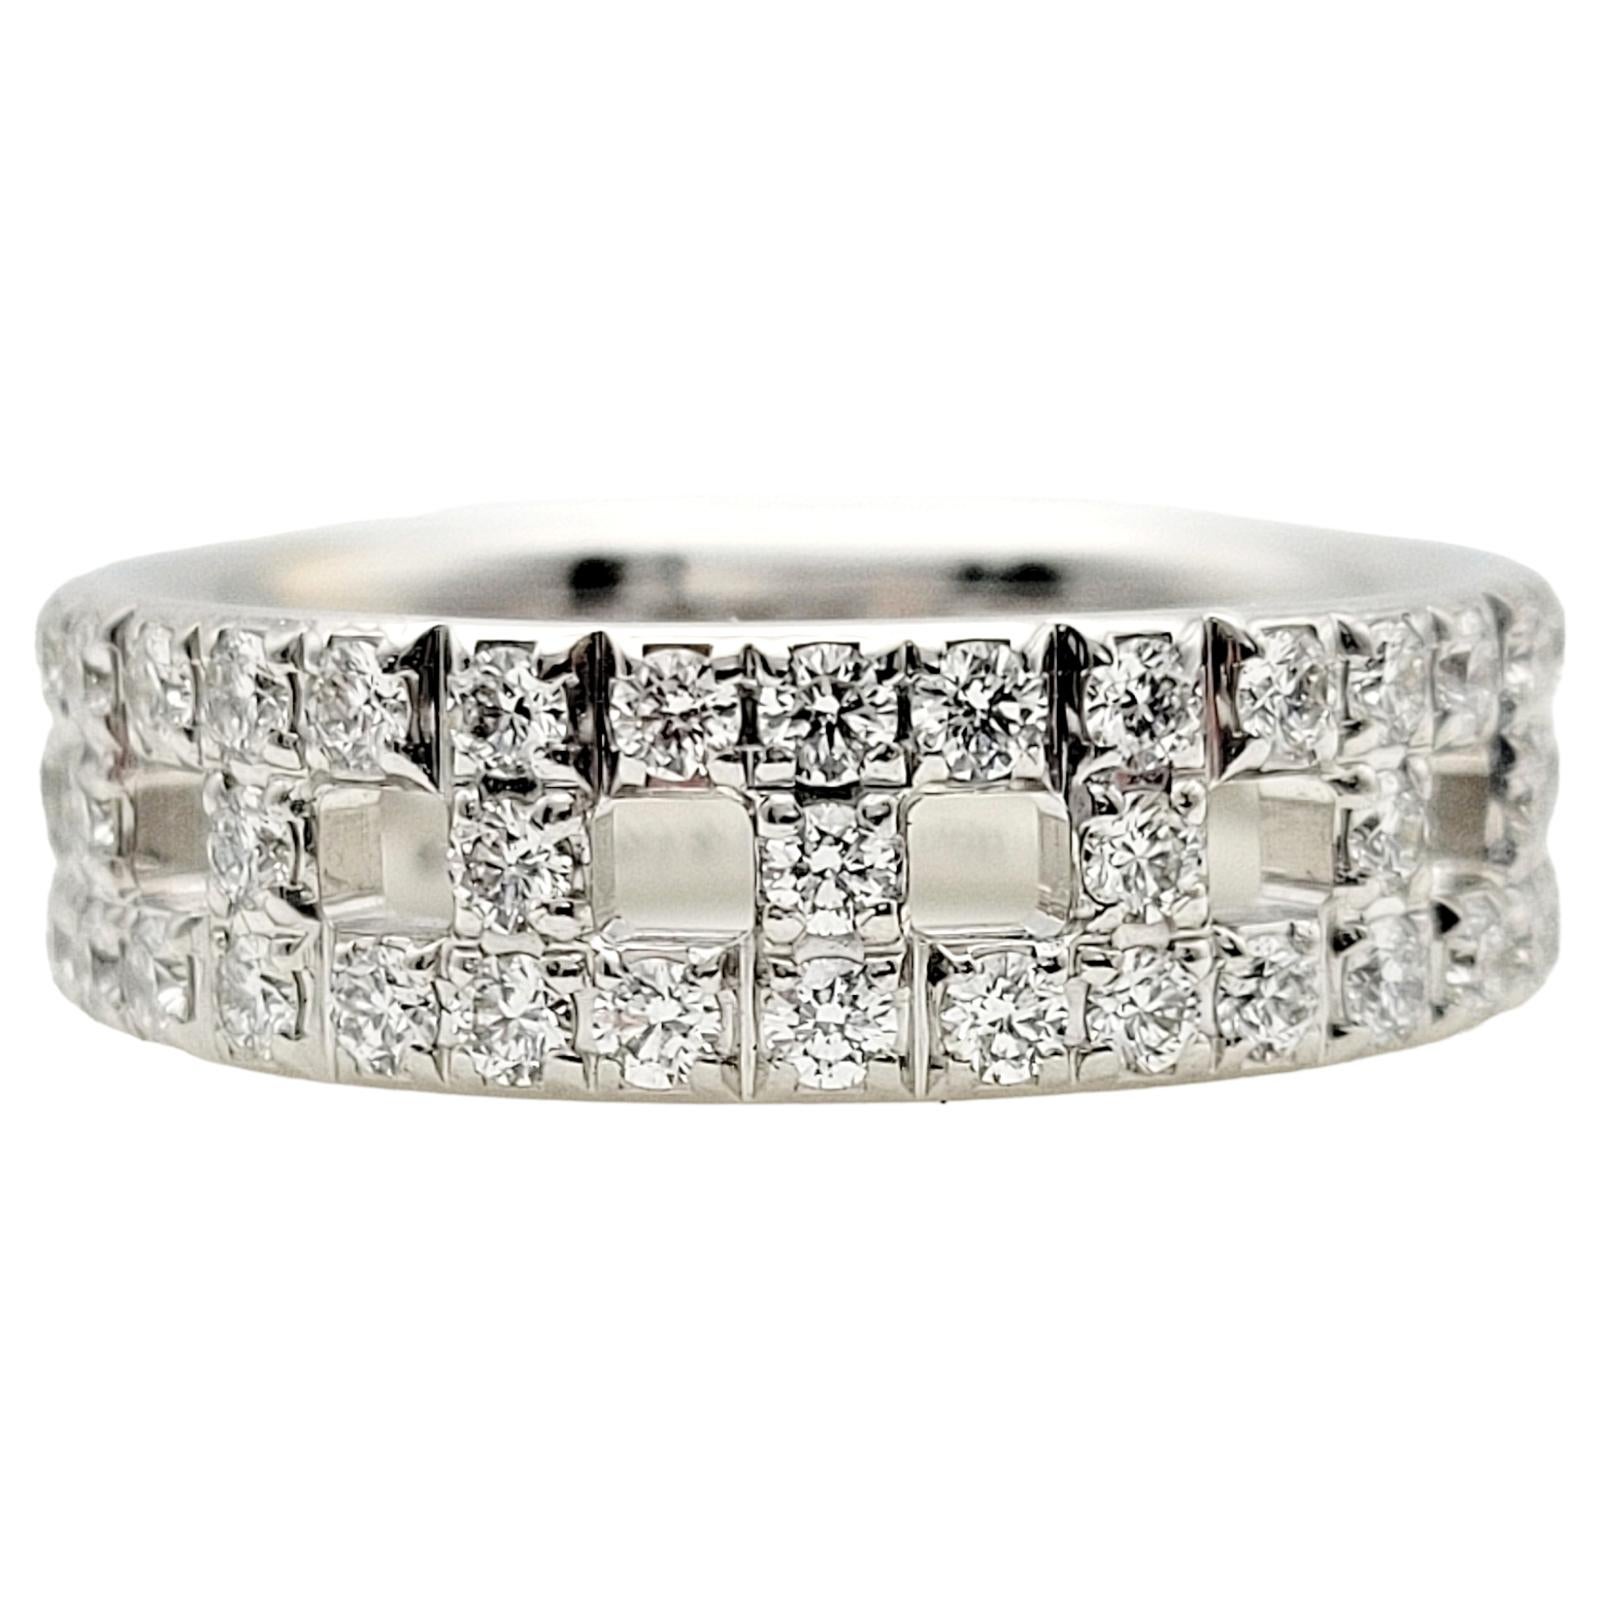 Contemporary Tiffany & Co. Tiffany T True Wide Band Ring with Diamonds in 18 Karat White Gold